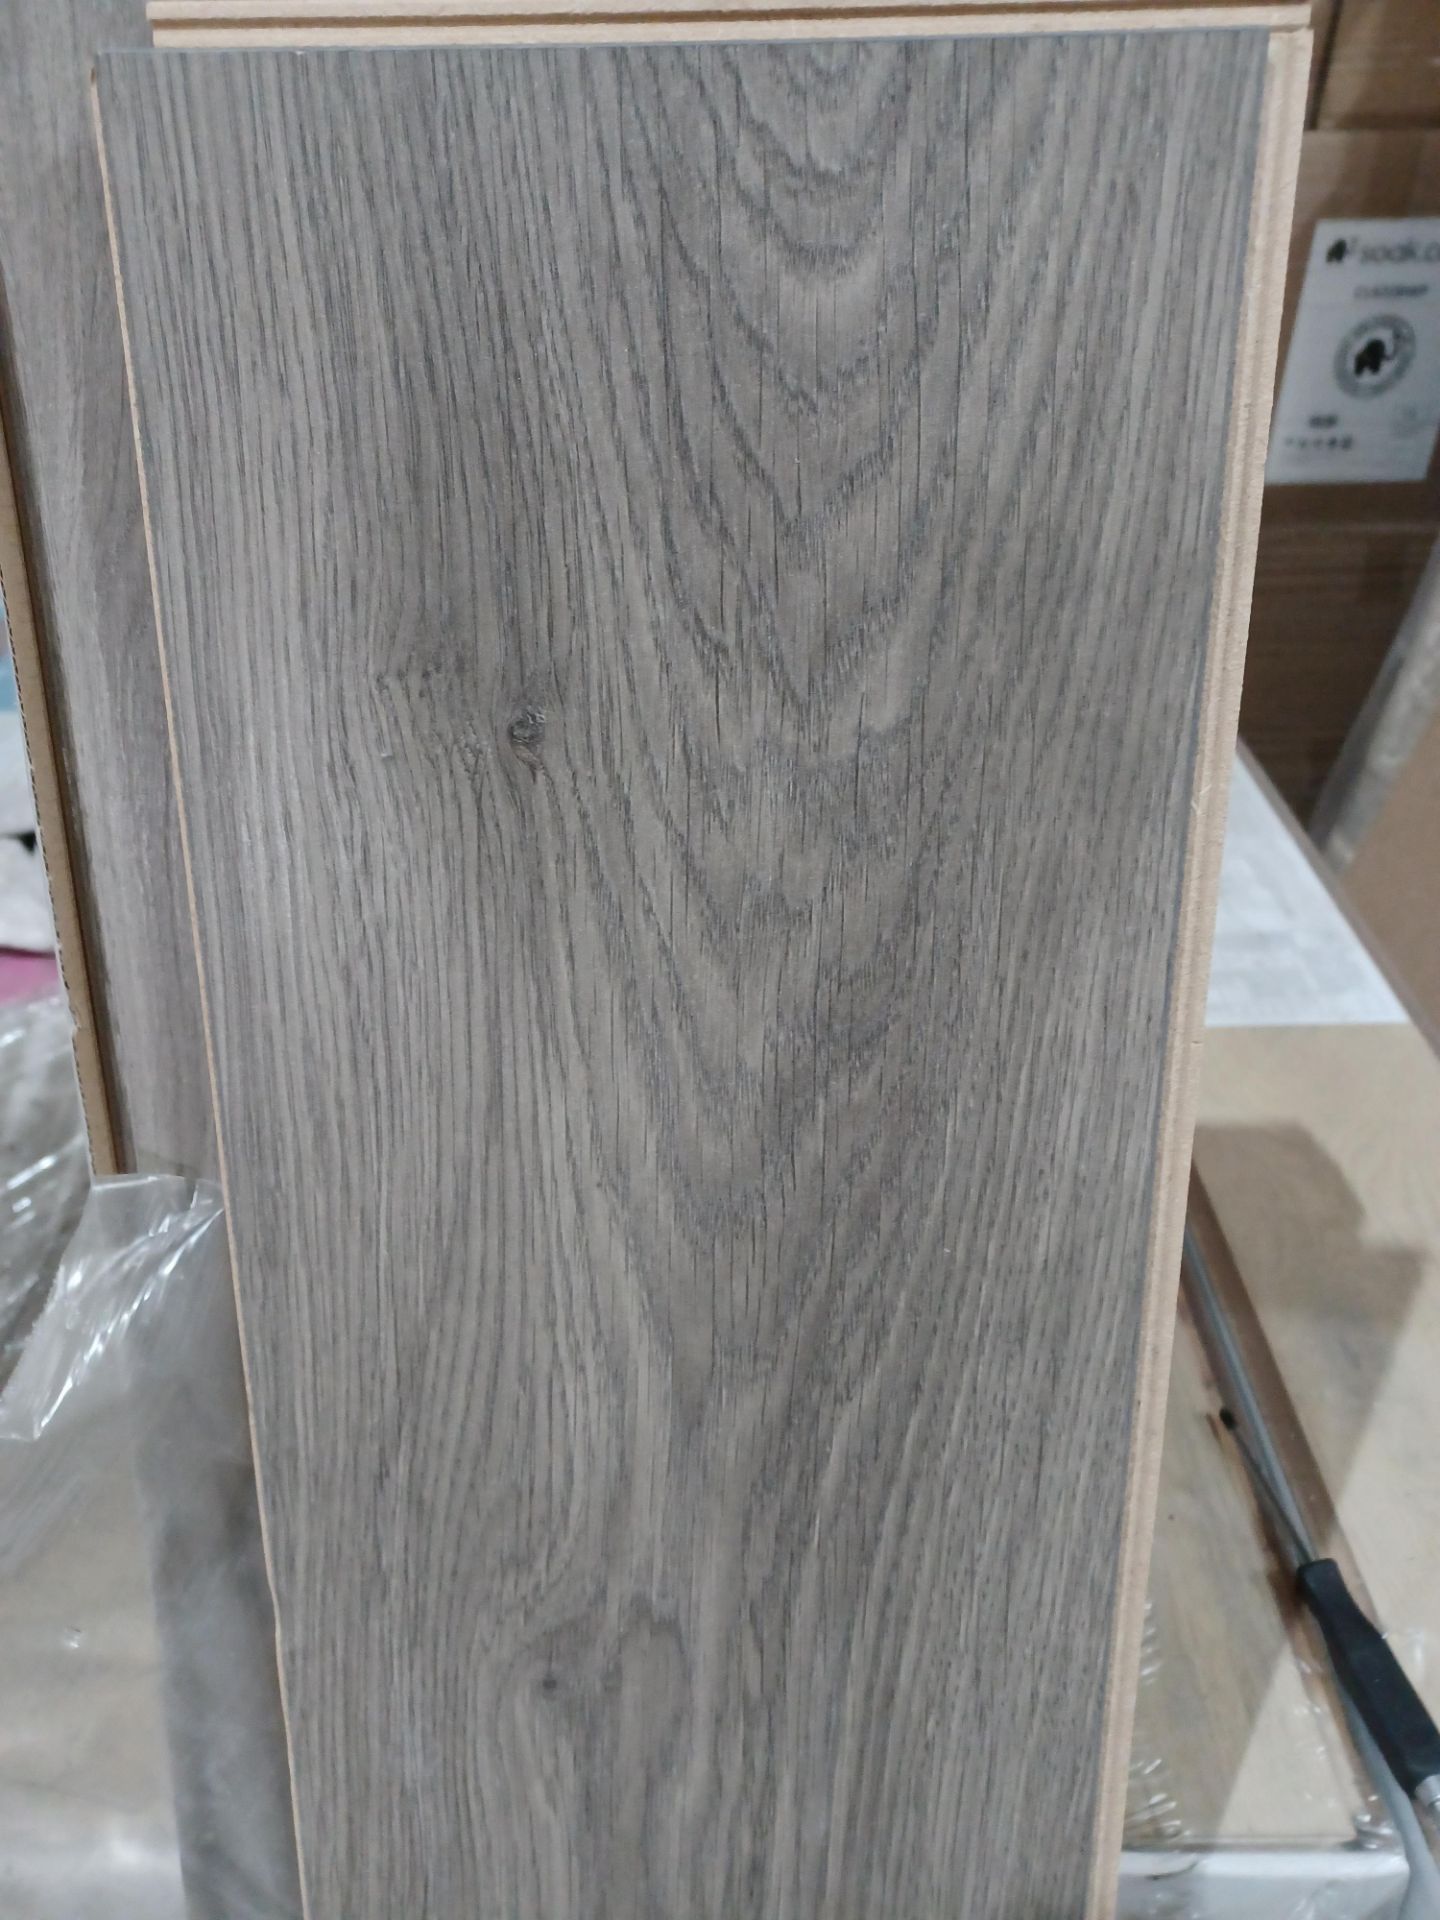 12 X PACKS OF Oldbury Grey Oak effect Laminate Flooring. EACH PACK CONTAINS 1.73m2, GIVING THIS - Image 2 of 2